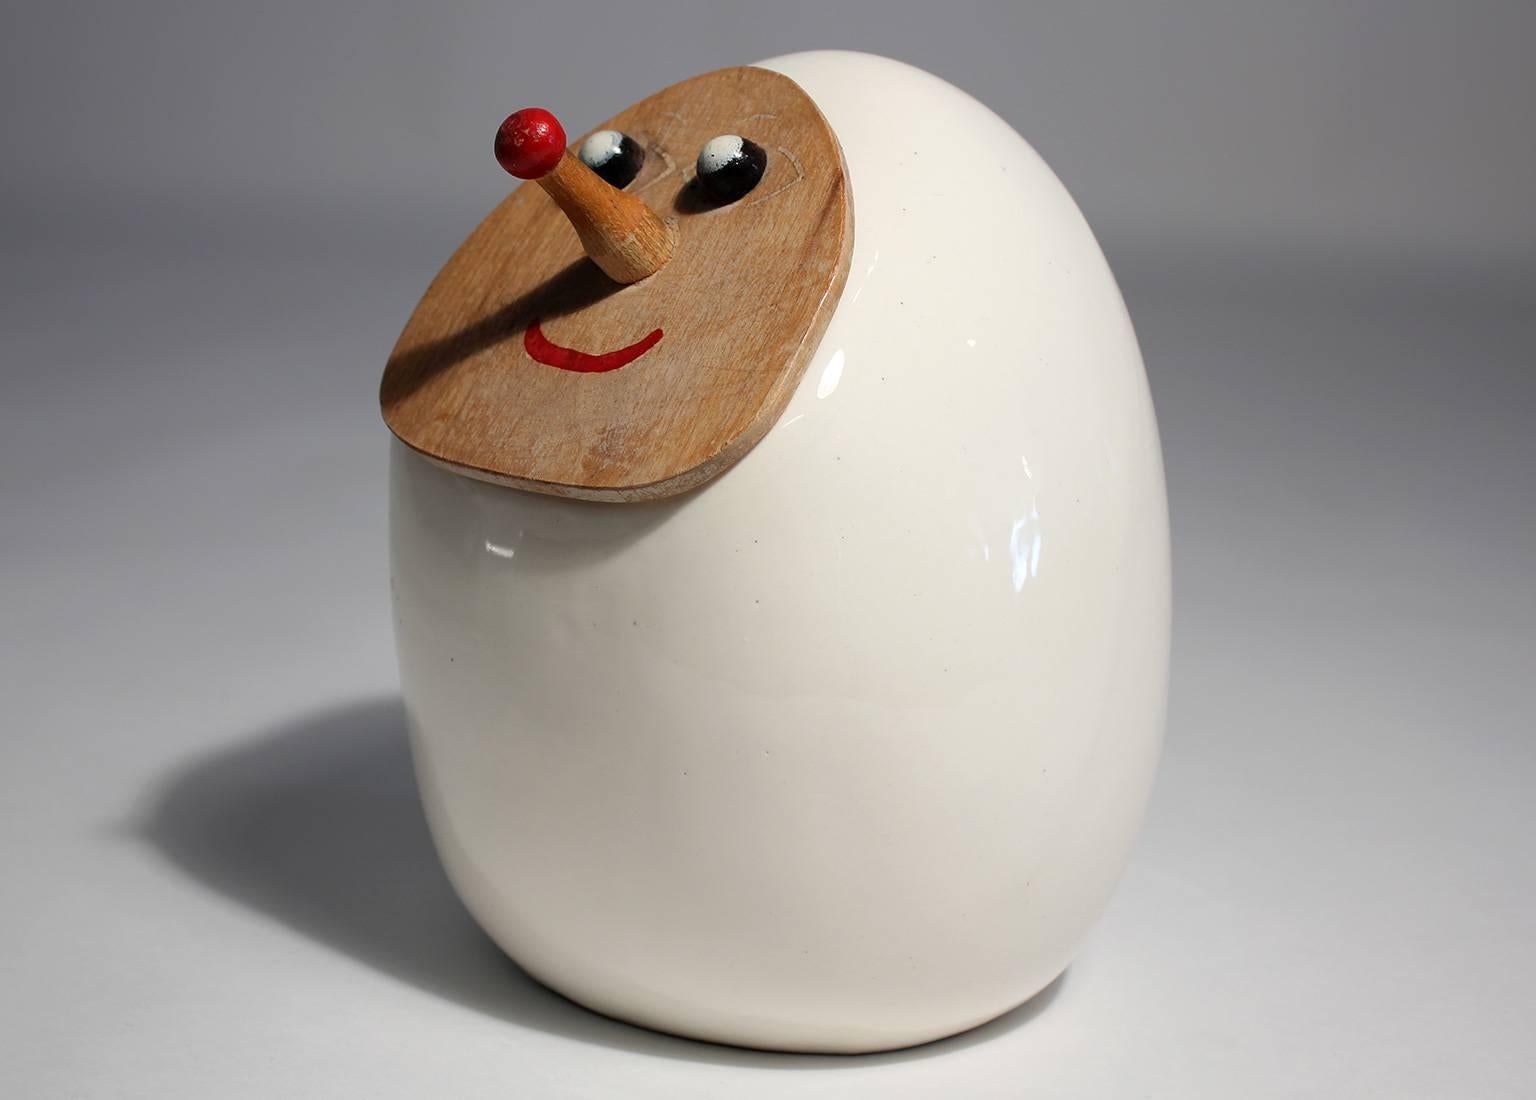 Whimsical ceramic cookie jar with painted wood face lid designed by Lagardo Tackett.